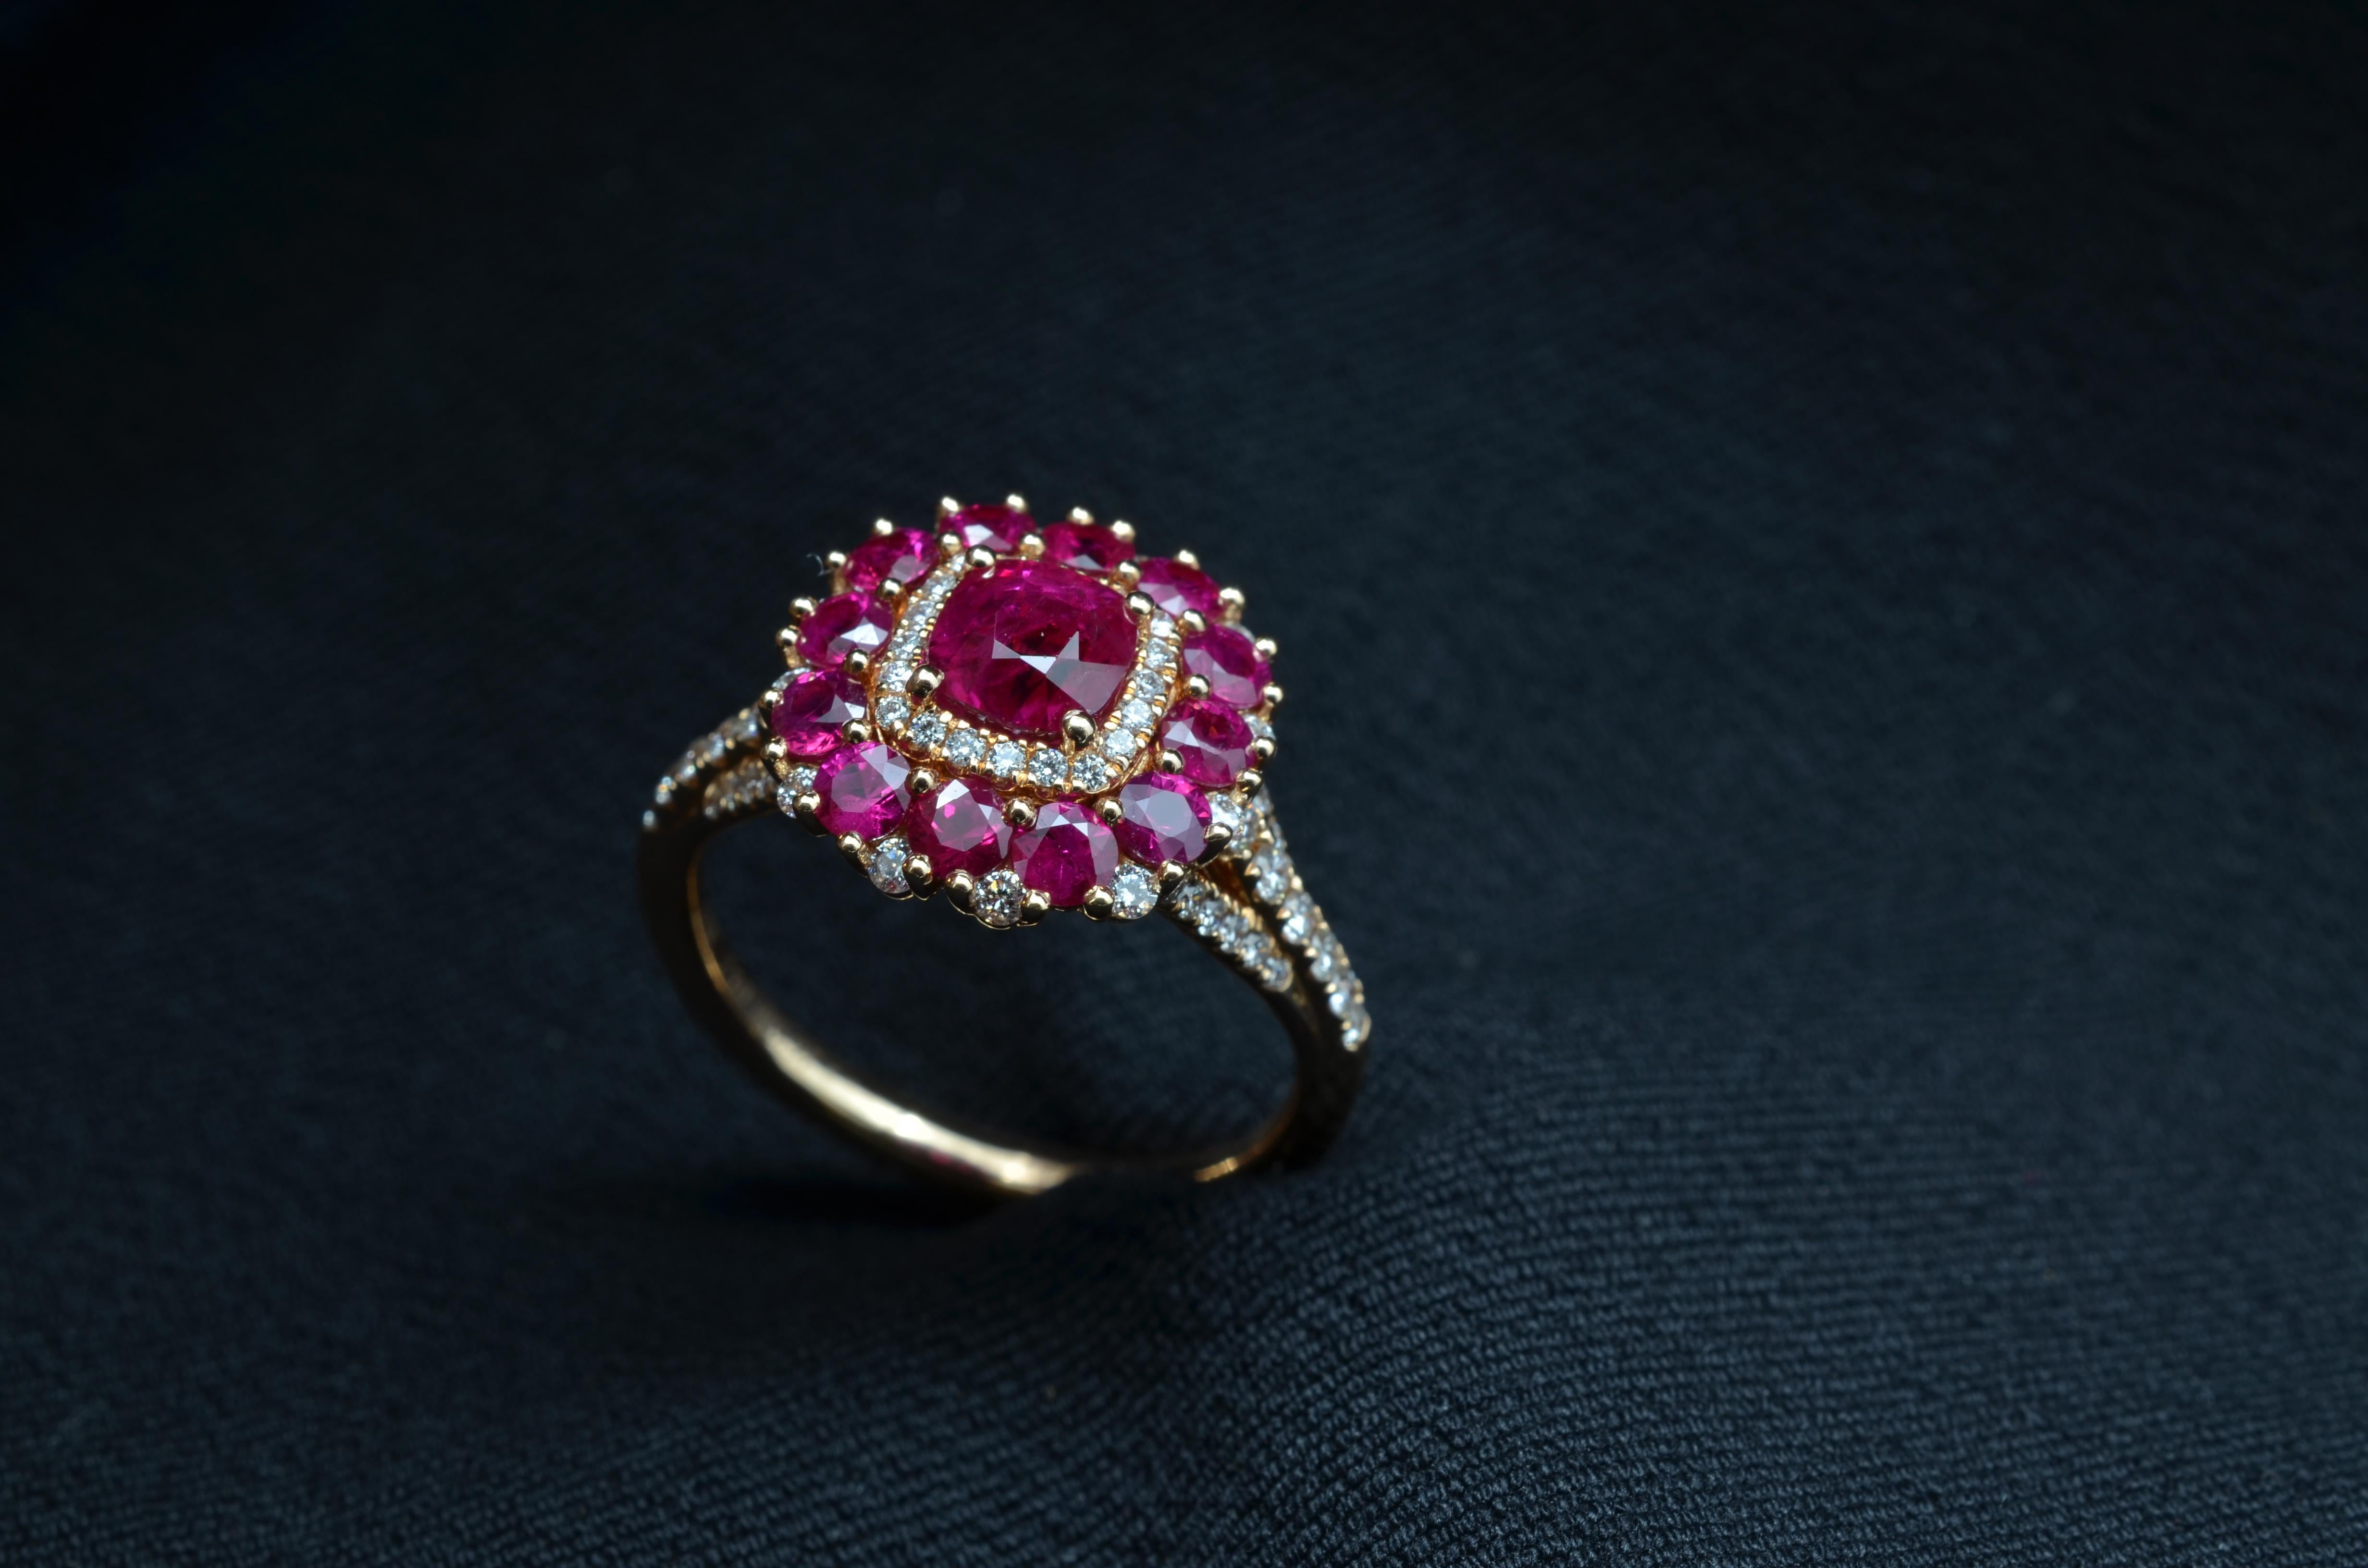 Lovely Valentine rose gold ring with old cut ruby cushion center halo diamonds around it and halo of round rubies. Delicate and 